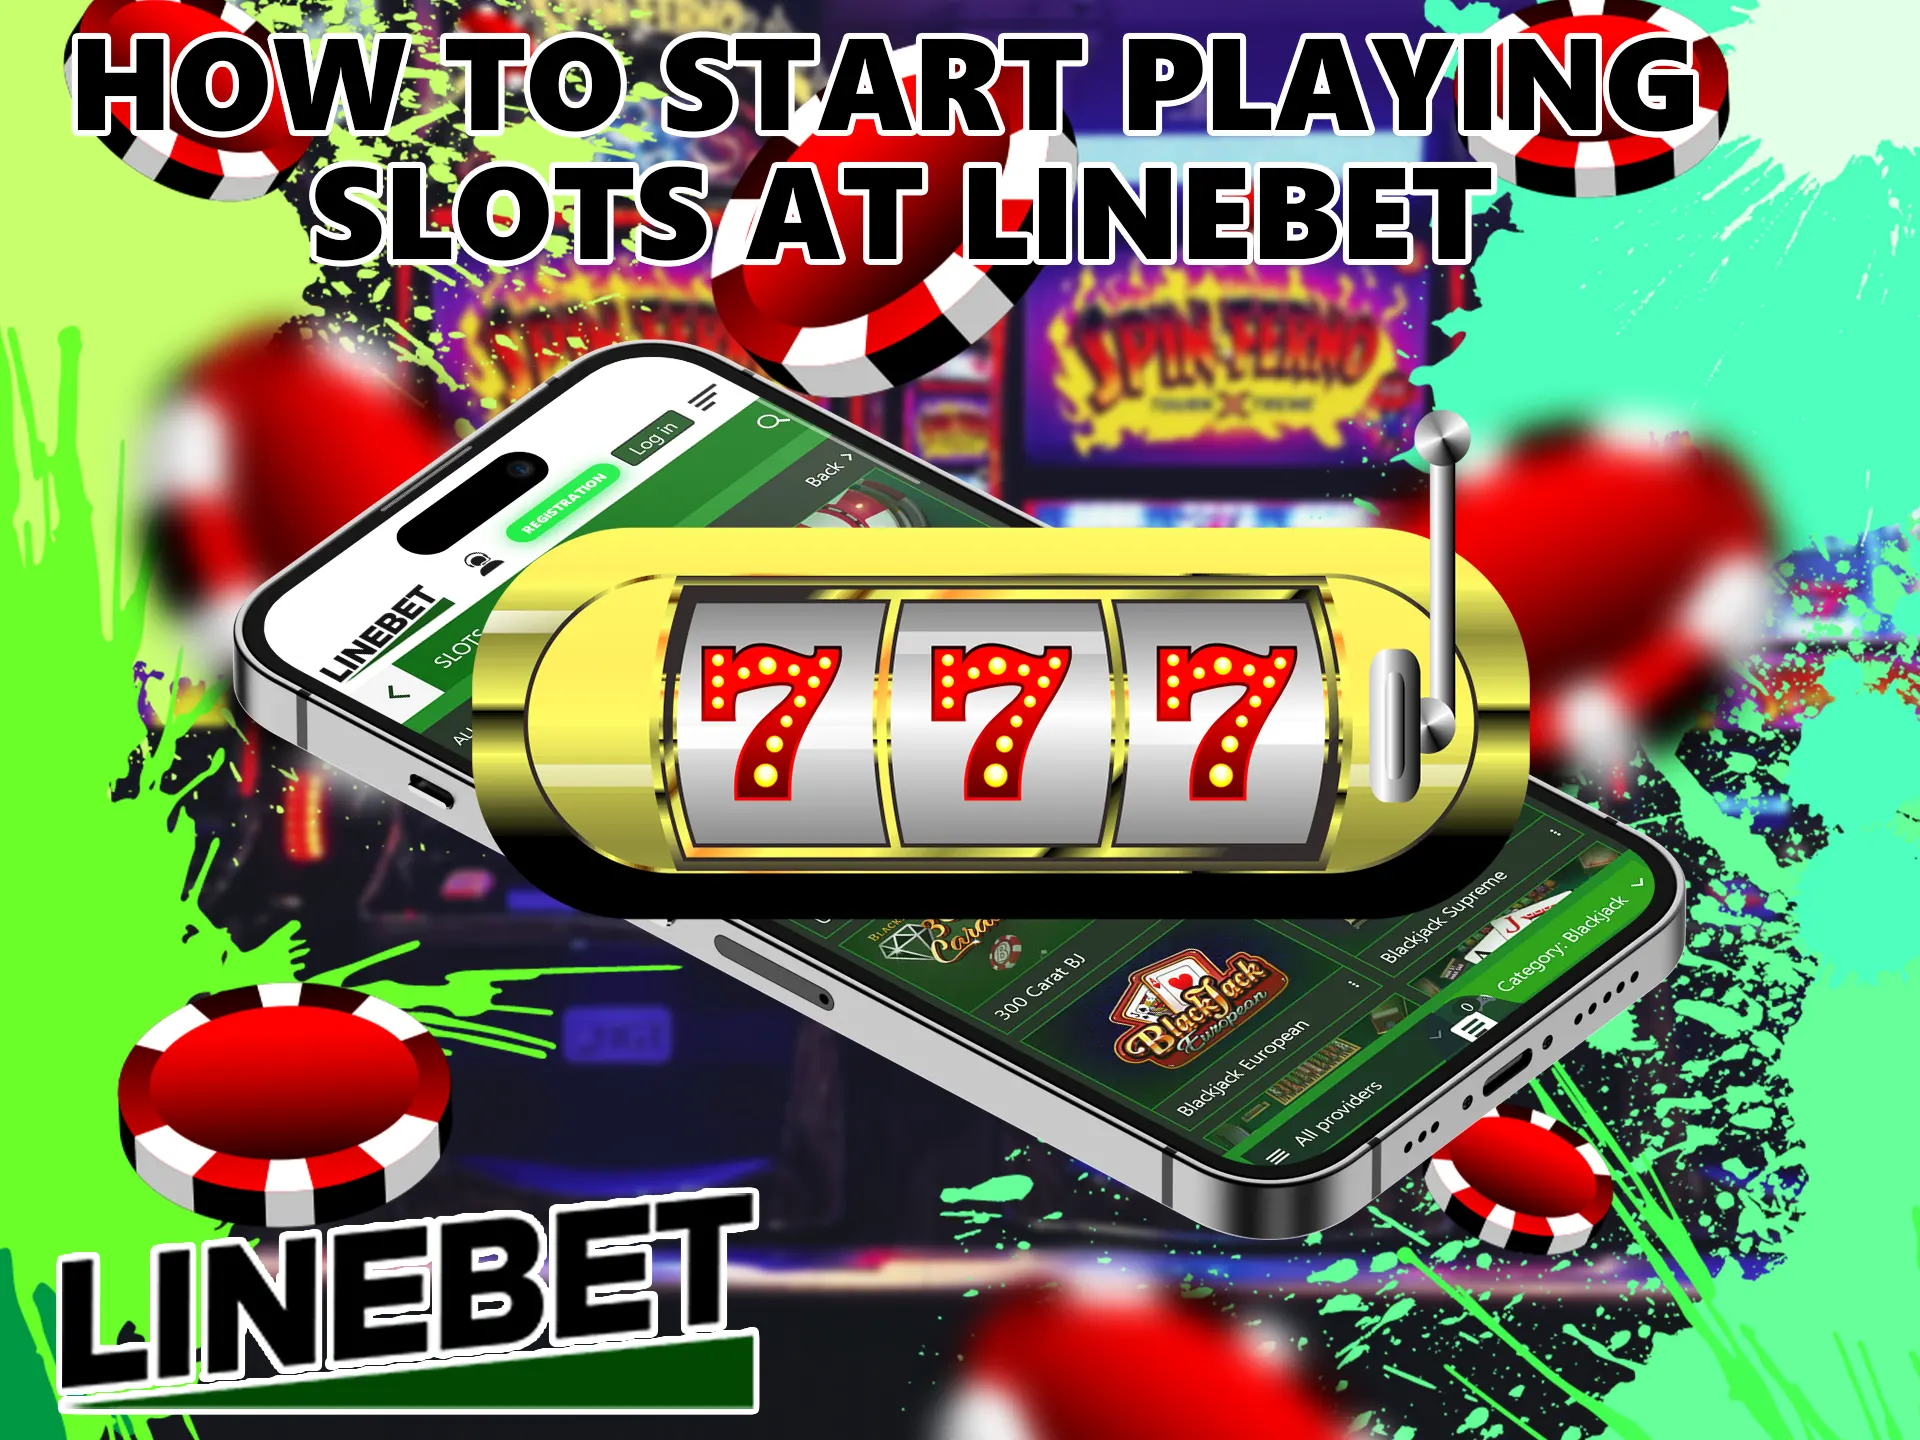 Getting started is easy, just sign up for a Linebet account, simply follow our guide and you will be completely immersed in the game.